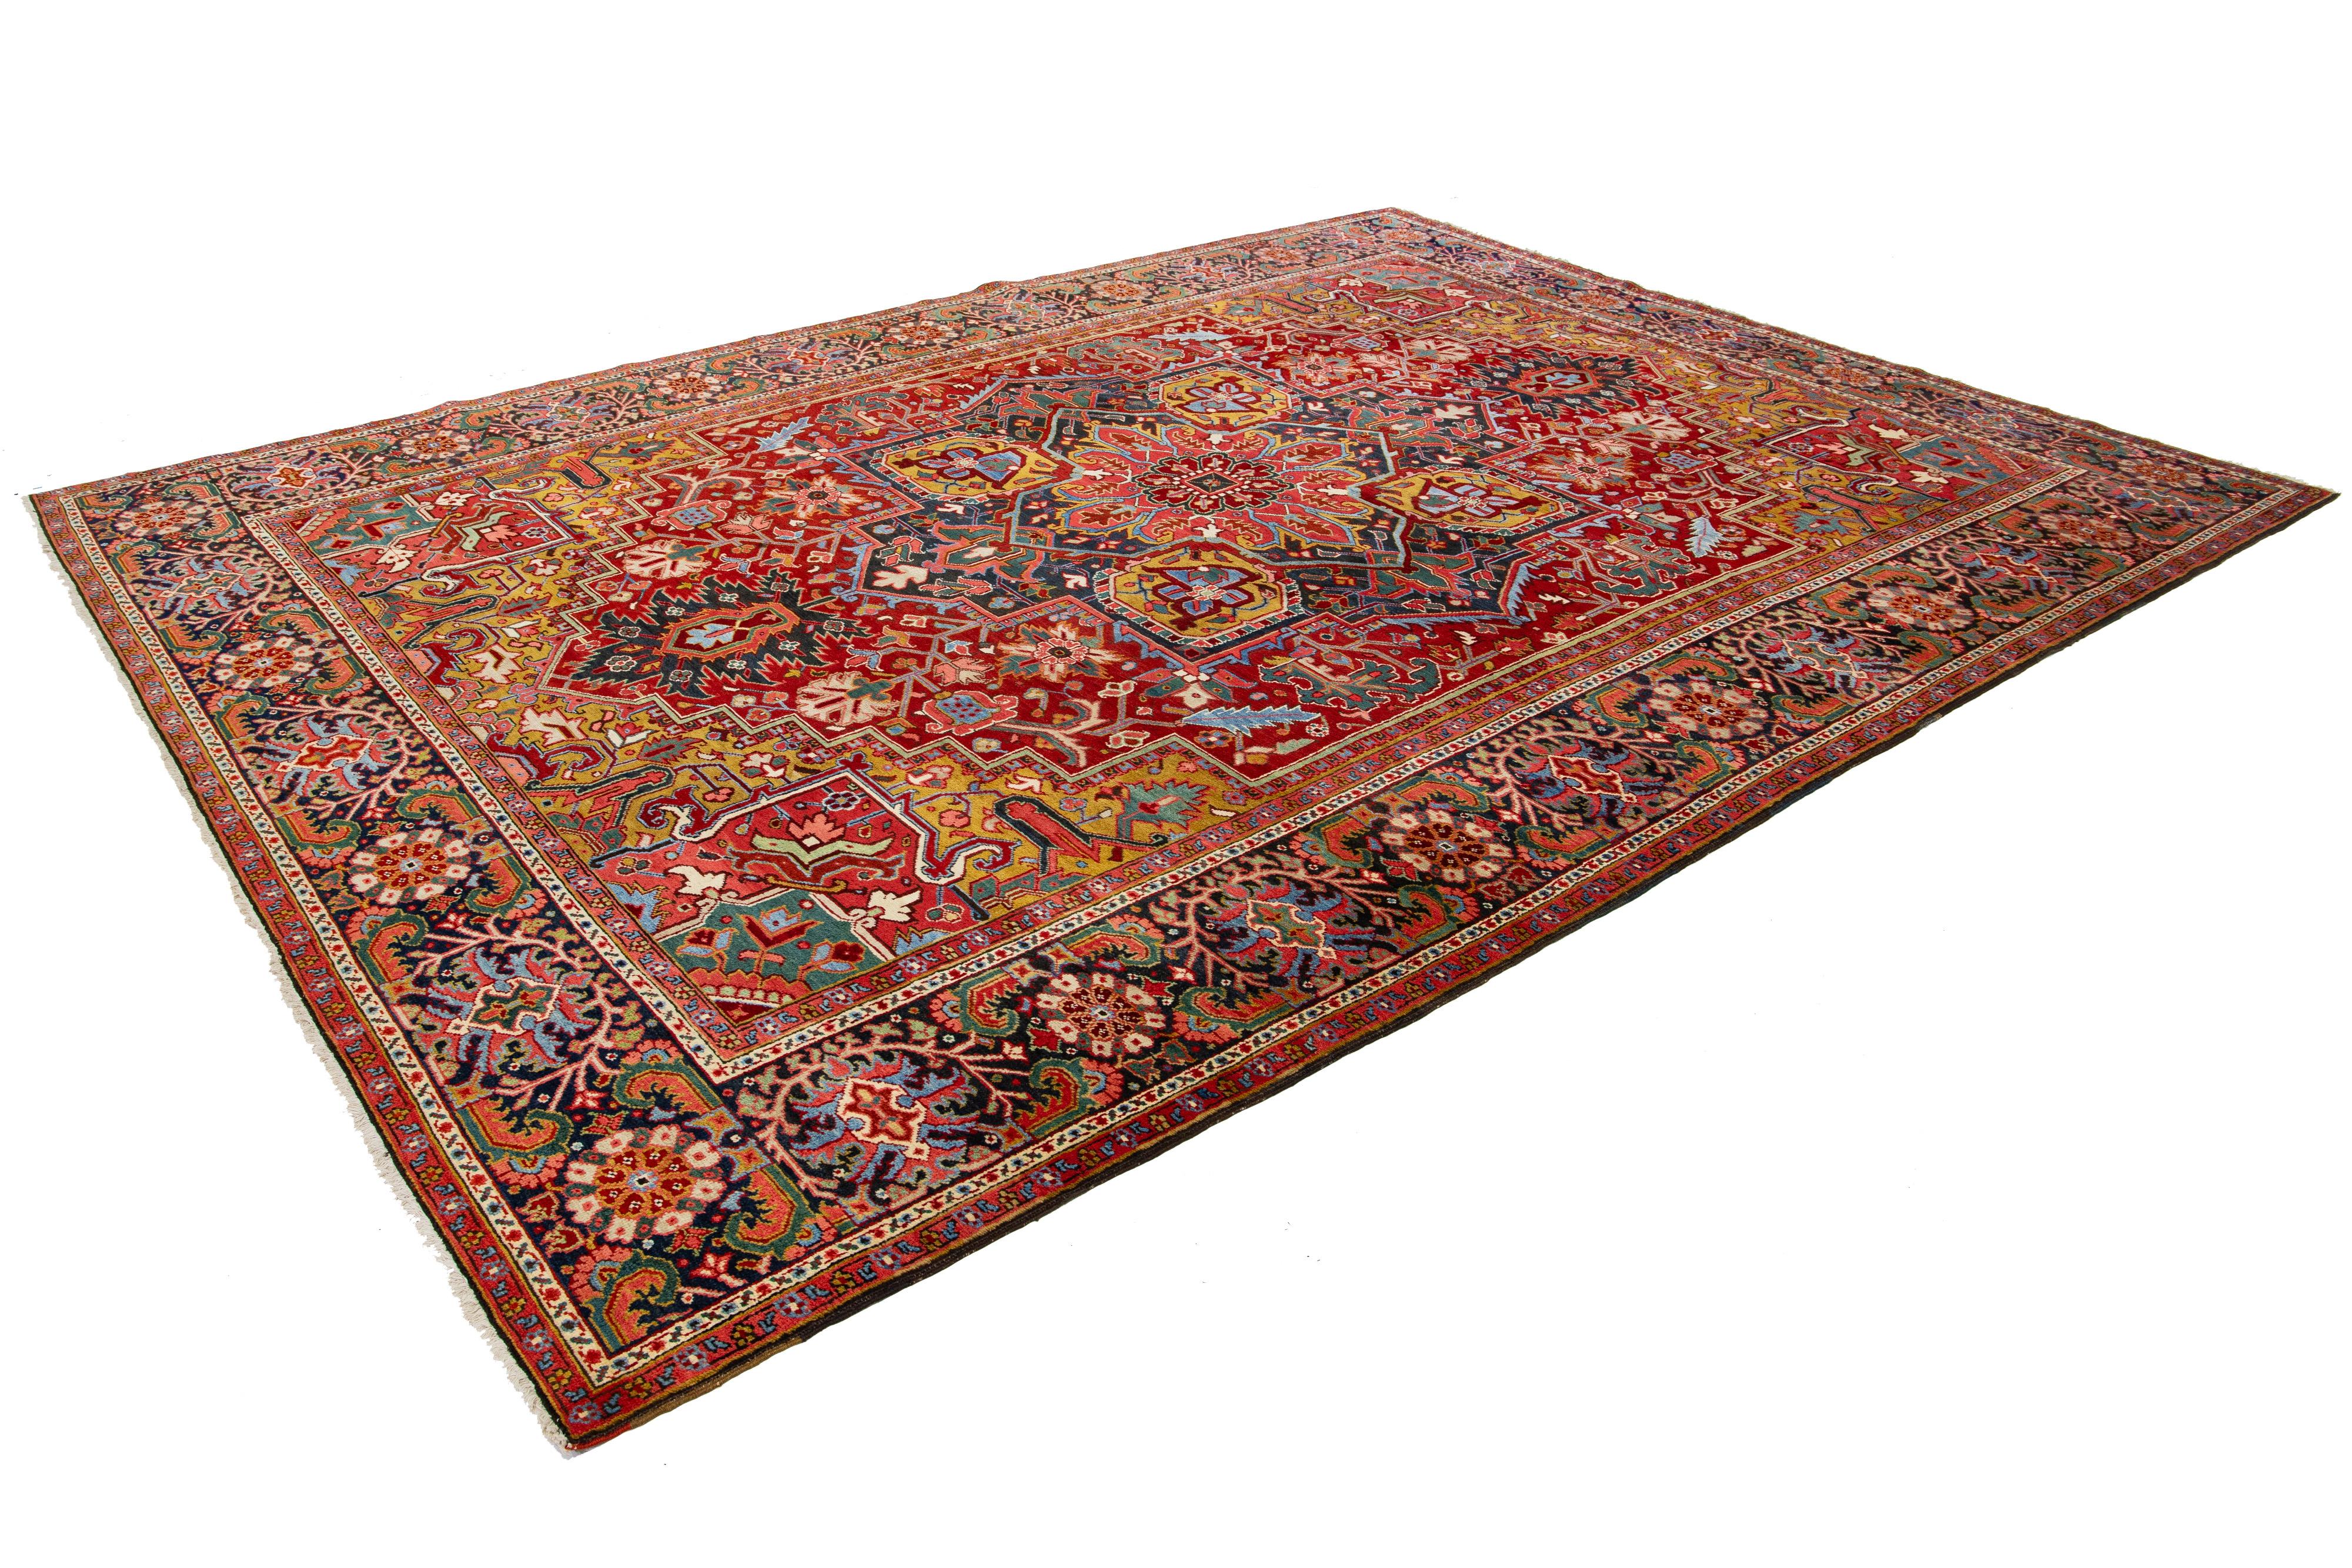 Antique Heriz Handmade Persian Medallion Designed Red Wool Rug In Excellent Condition For Sale In Norwalk, CT